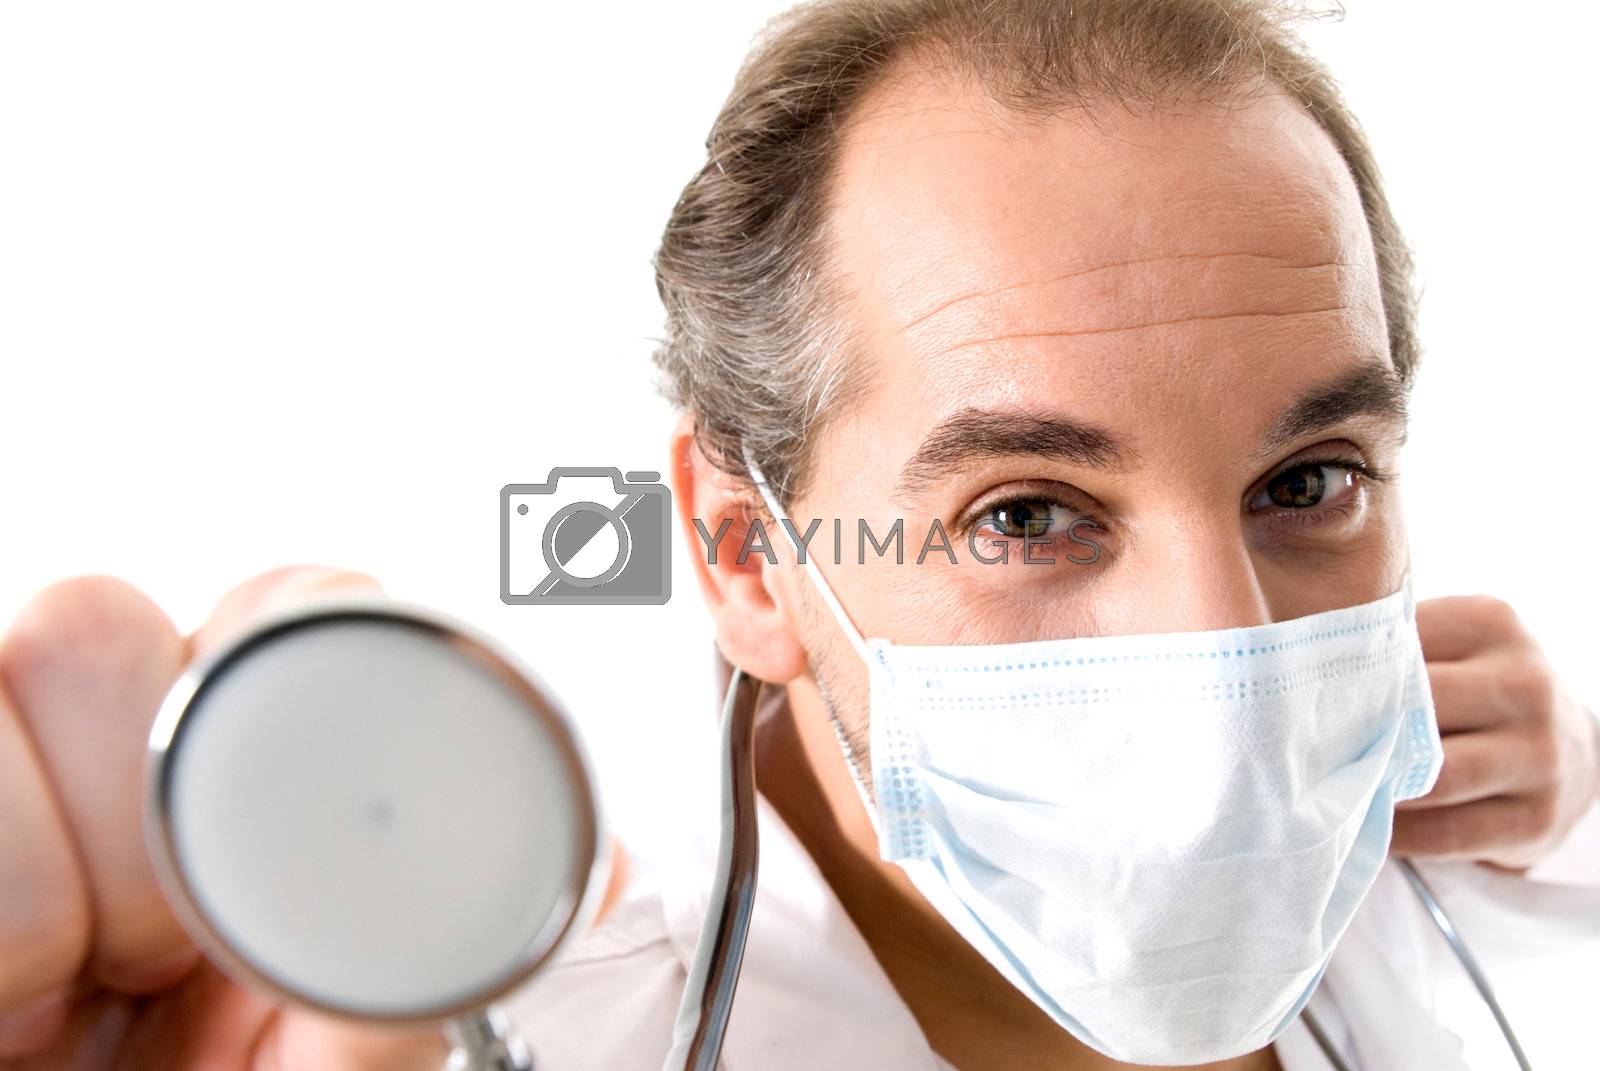 Royalty free image of Medic with stethoscope and medical mask. by dgmata